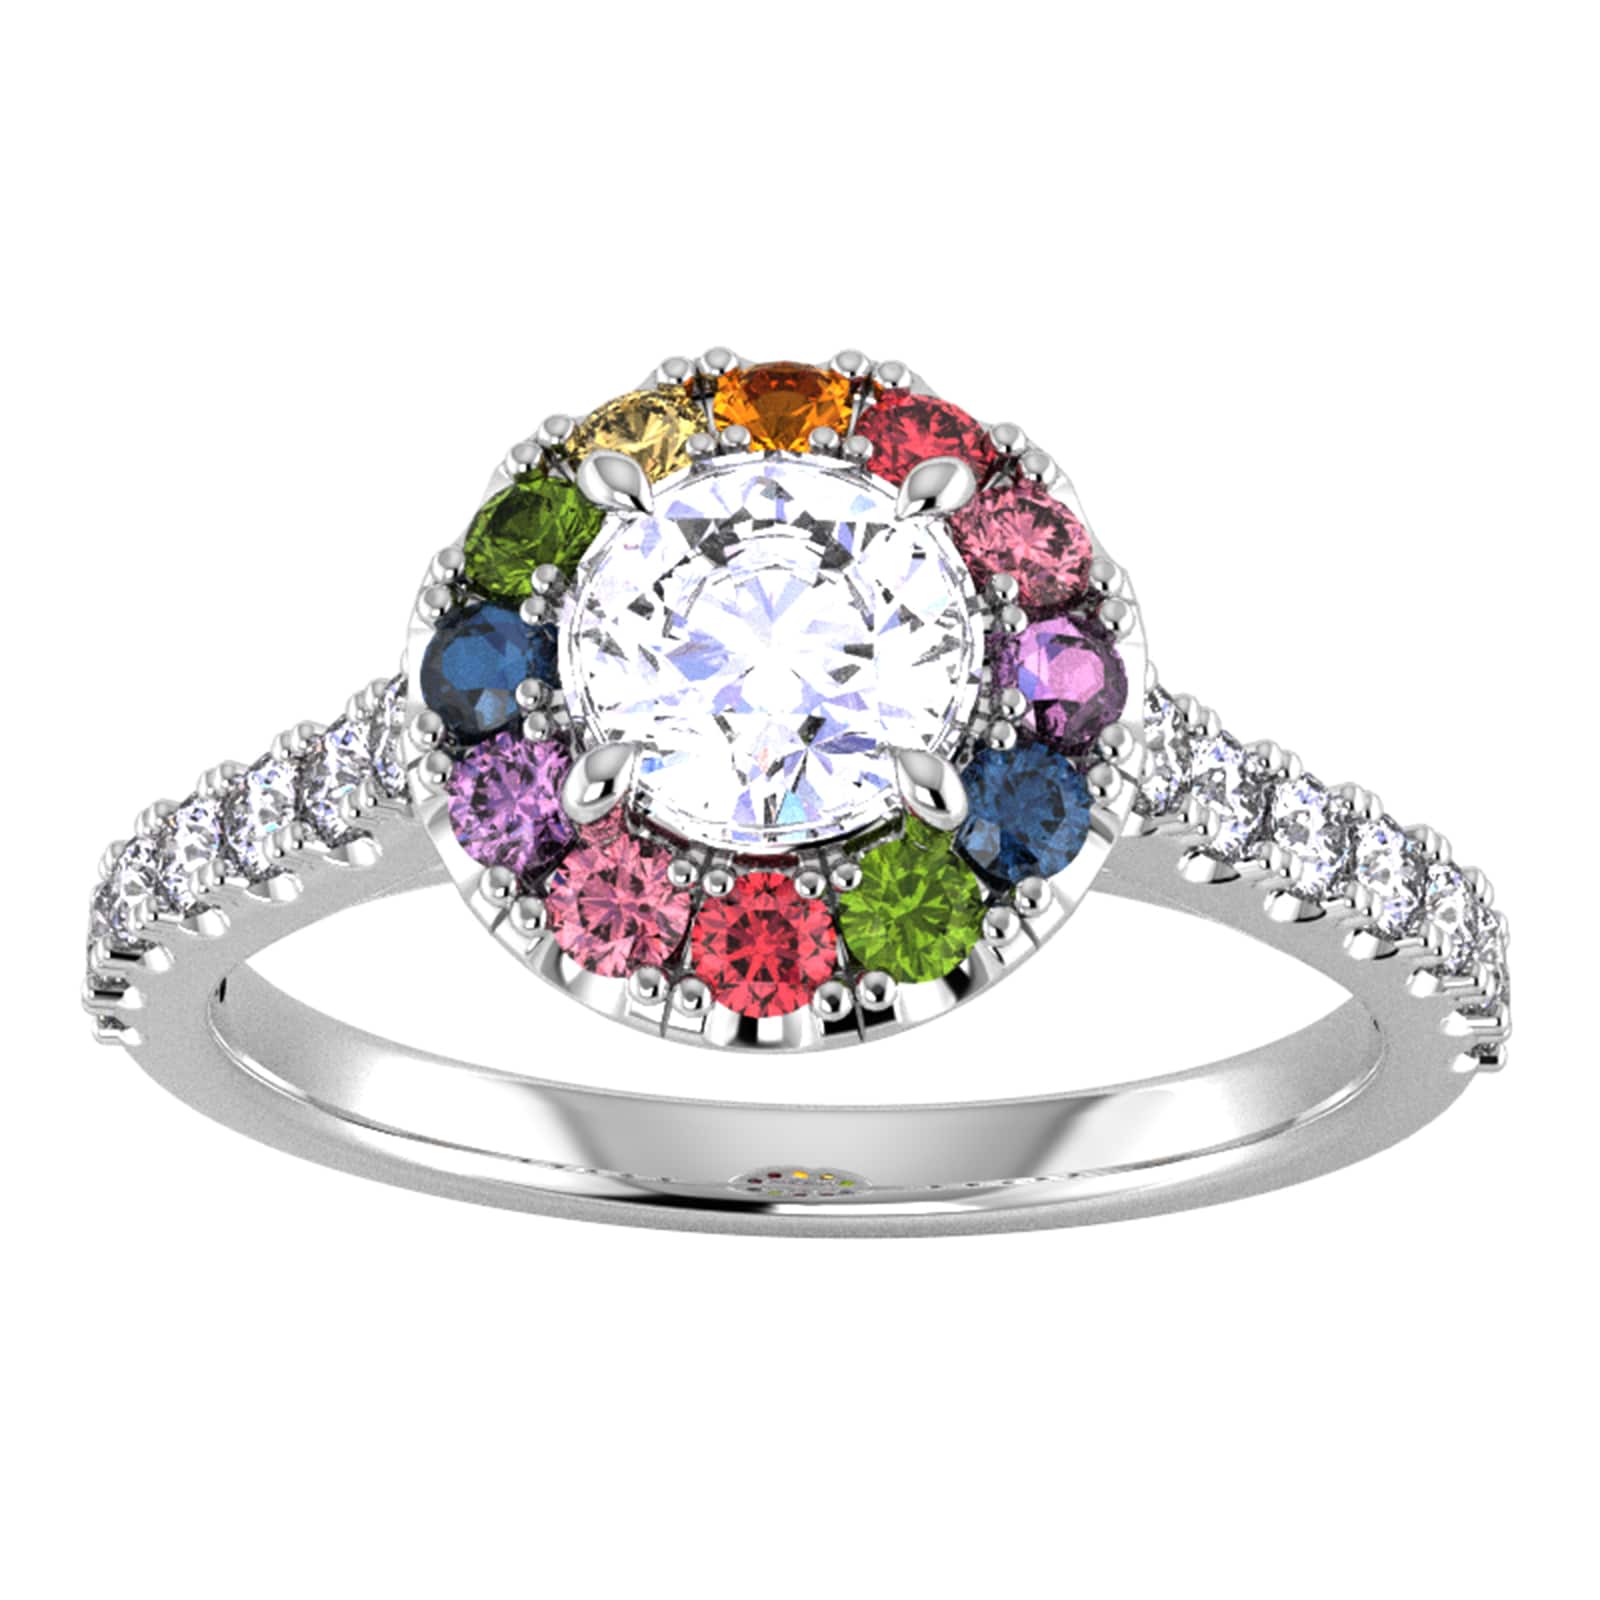 9ct White Gold Diamond & Rainbow Sapphire Halo Ring - Ring Size A.5